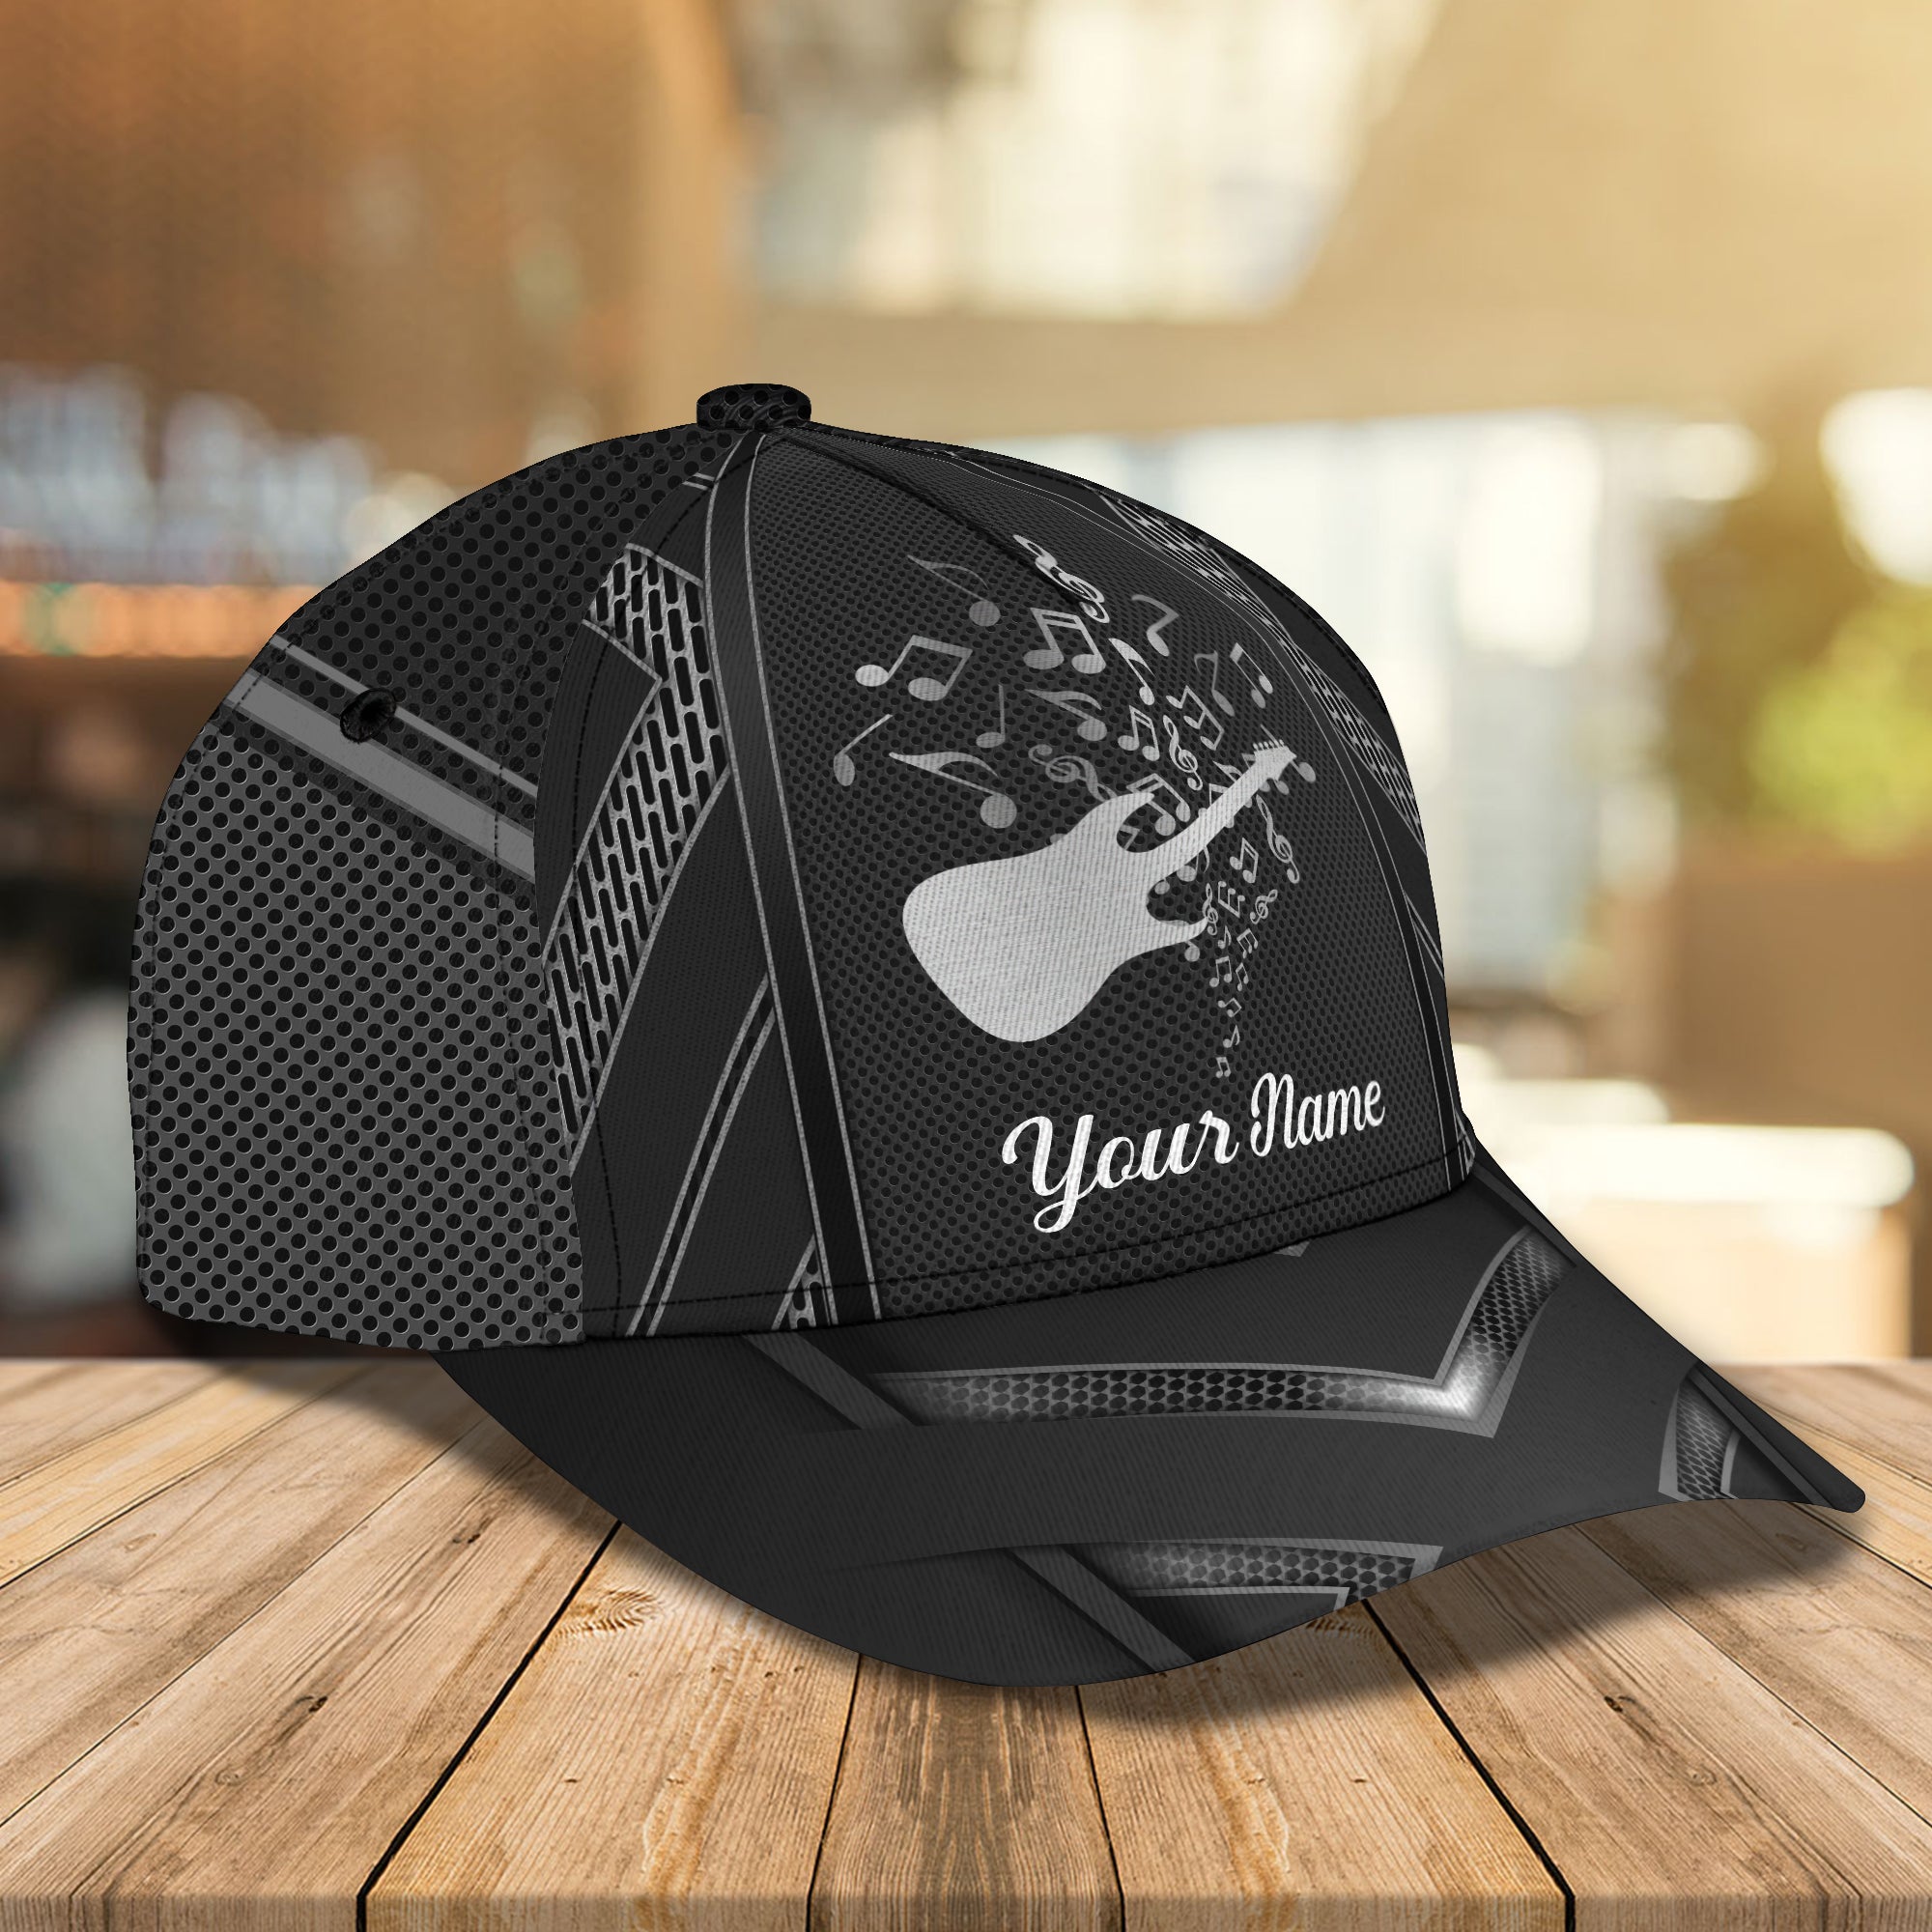 GUITAR CAP2 - Personalized Name Cap - BY97